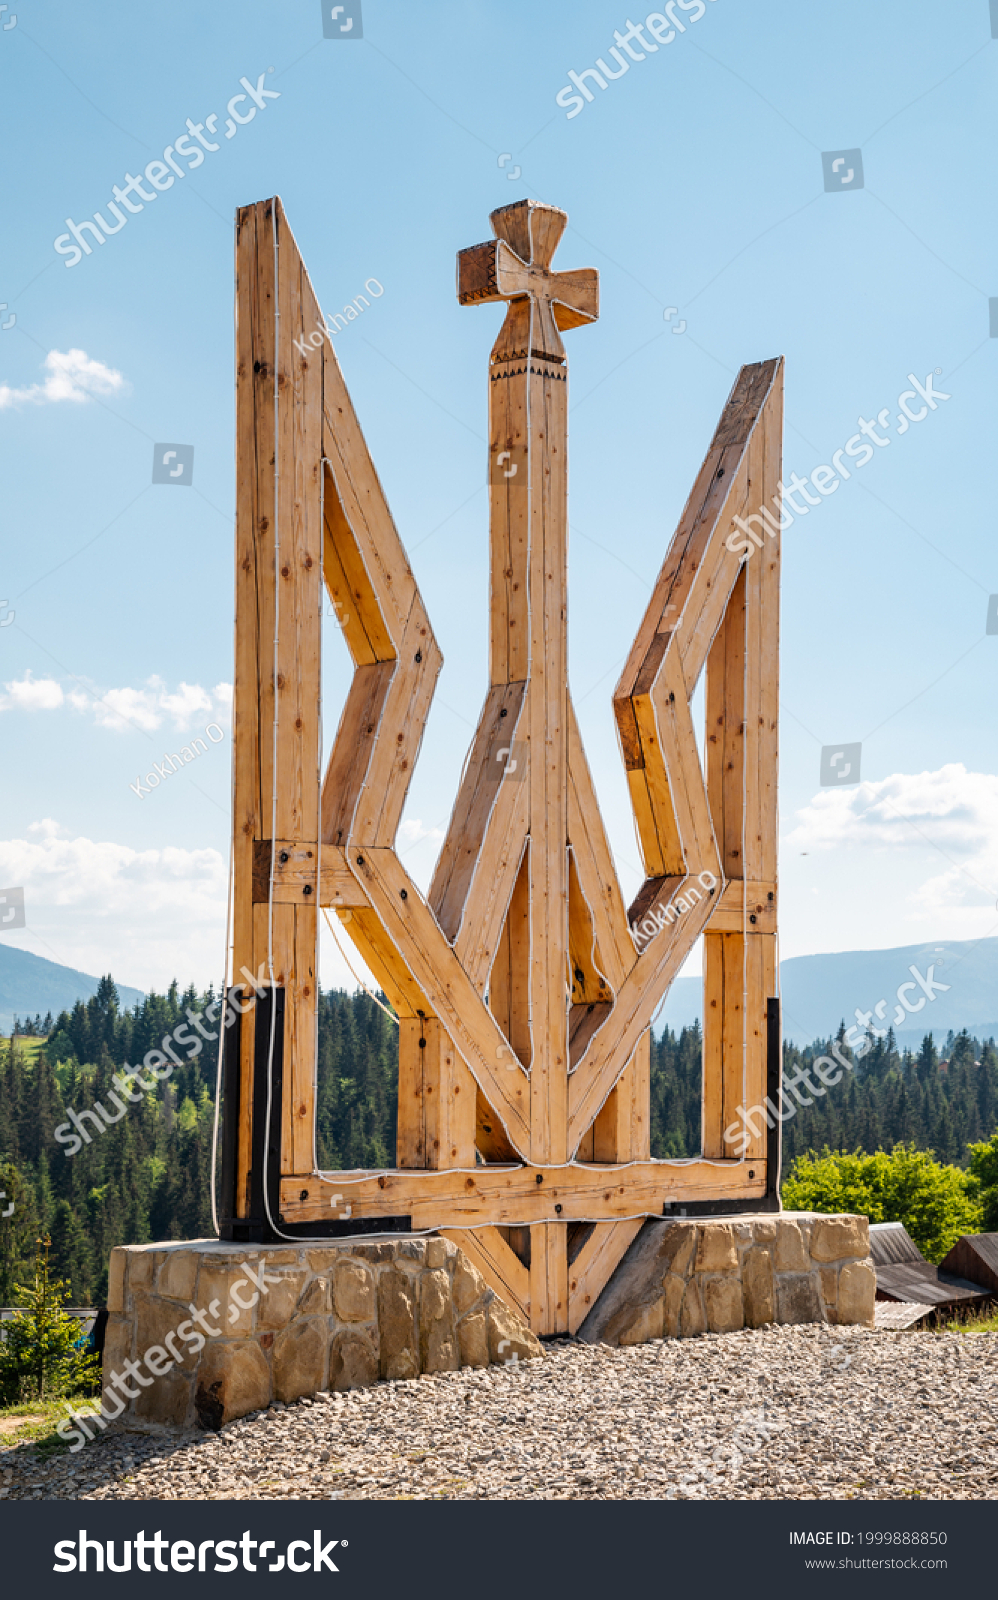 Emblem of Ukraine.
A large yellow wooden trident set on a stone high in the Carpathian mountains. #1999888850